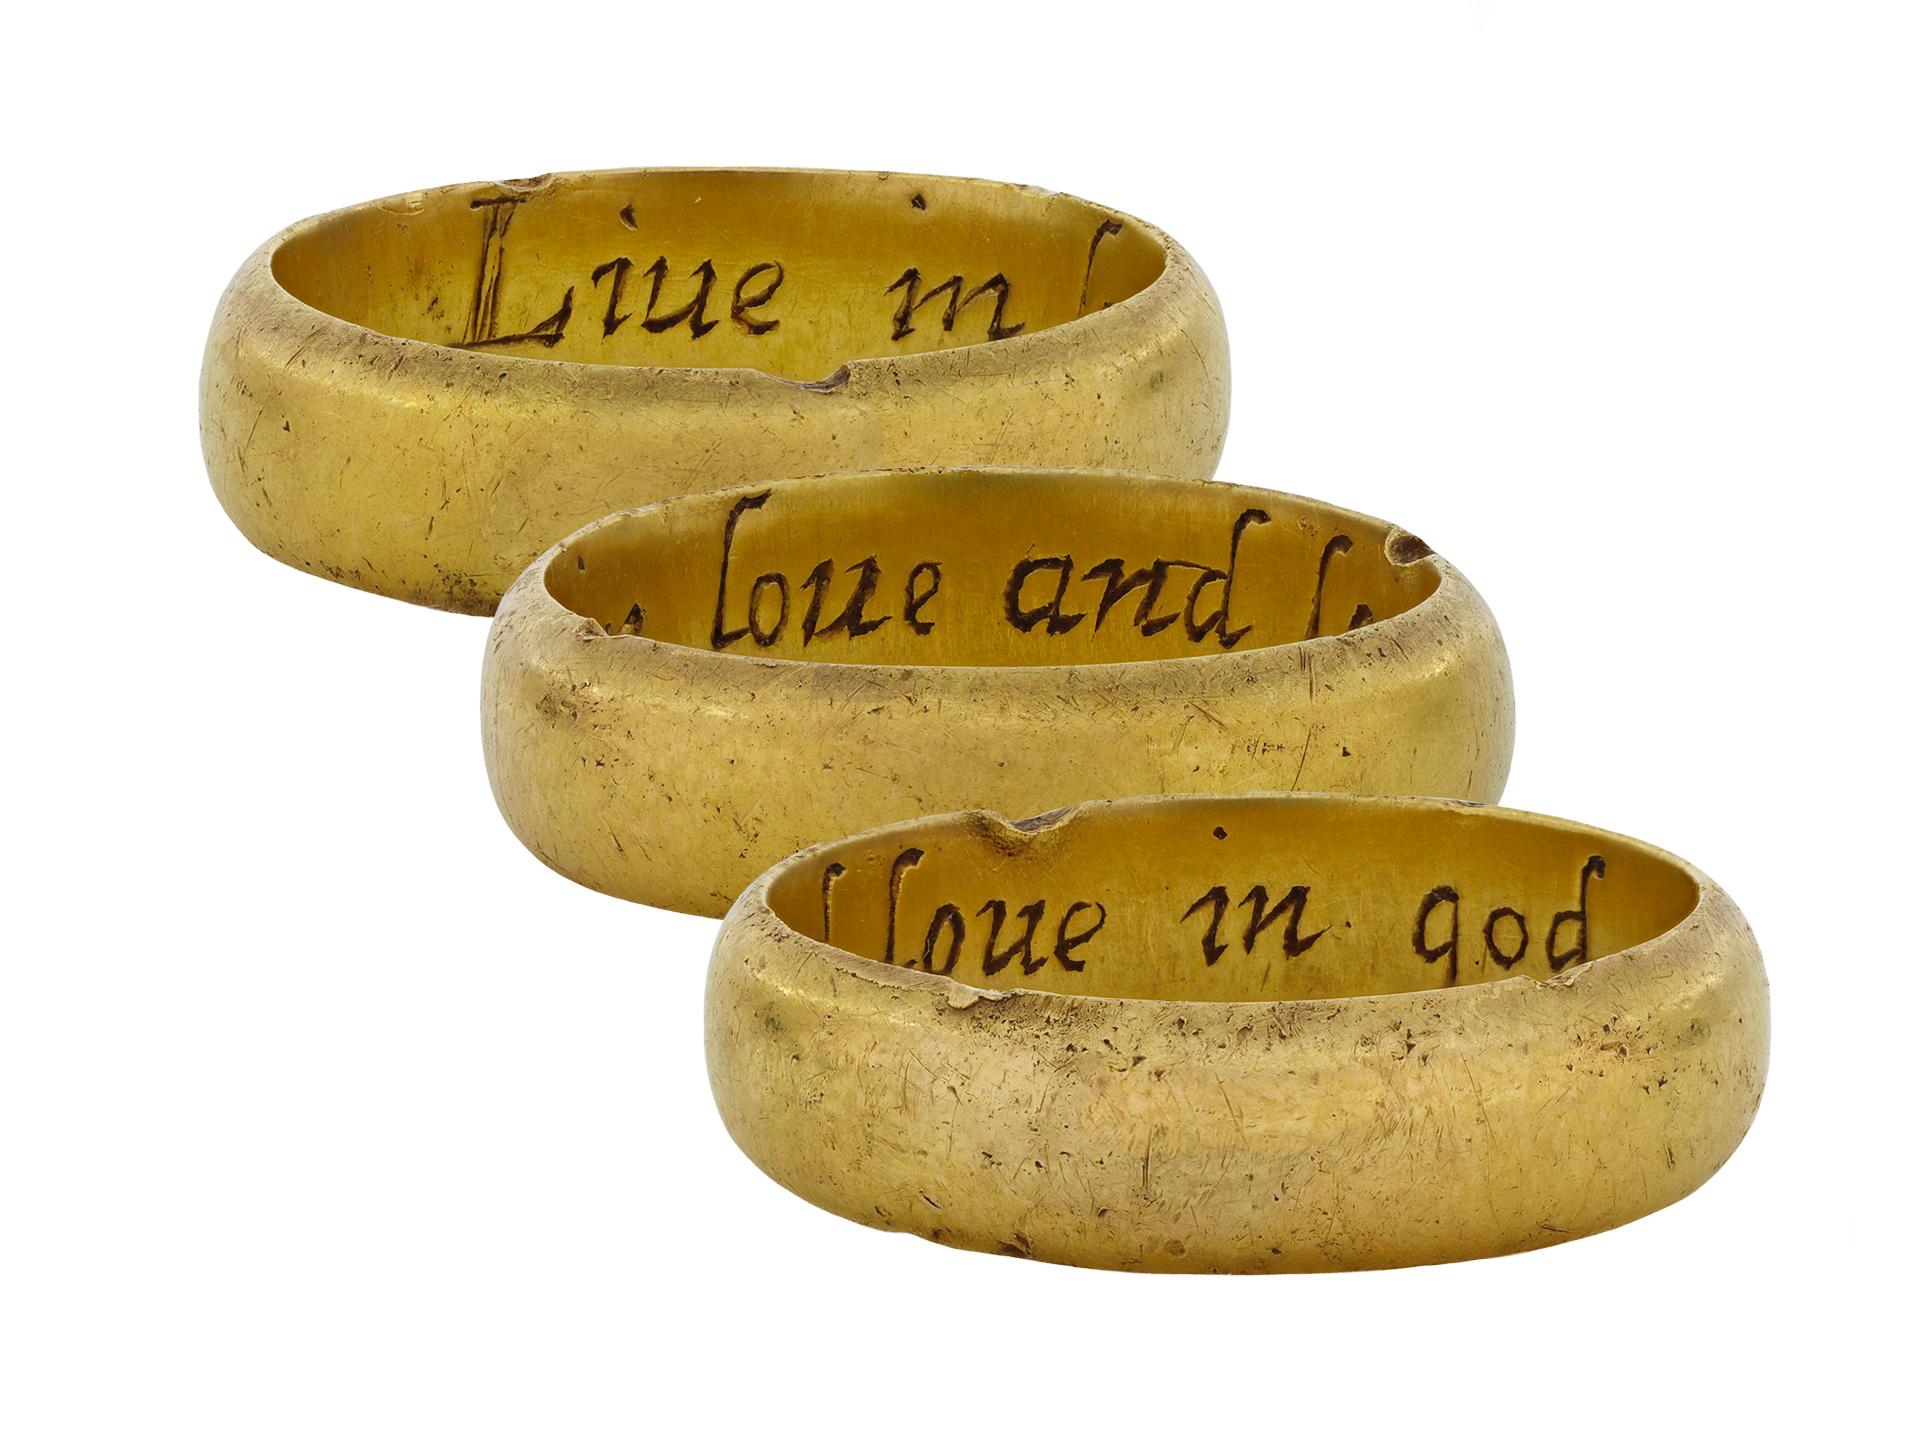 Post Medieval posy ring 'Live in love and love in god *'. A smoothly conforming posy ring, engraved to the interior 'Live in love and love in god *' approximately 5.9mm in width. Tested yellow gold, circa 17th century.

Accompanied by documentation